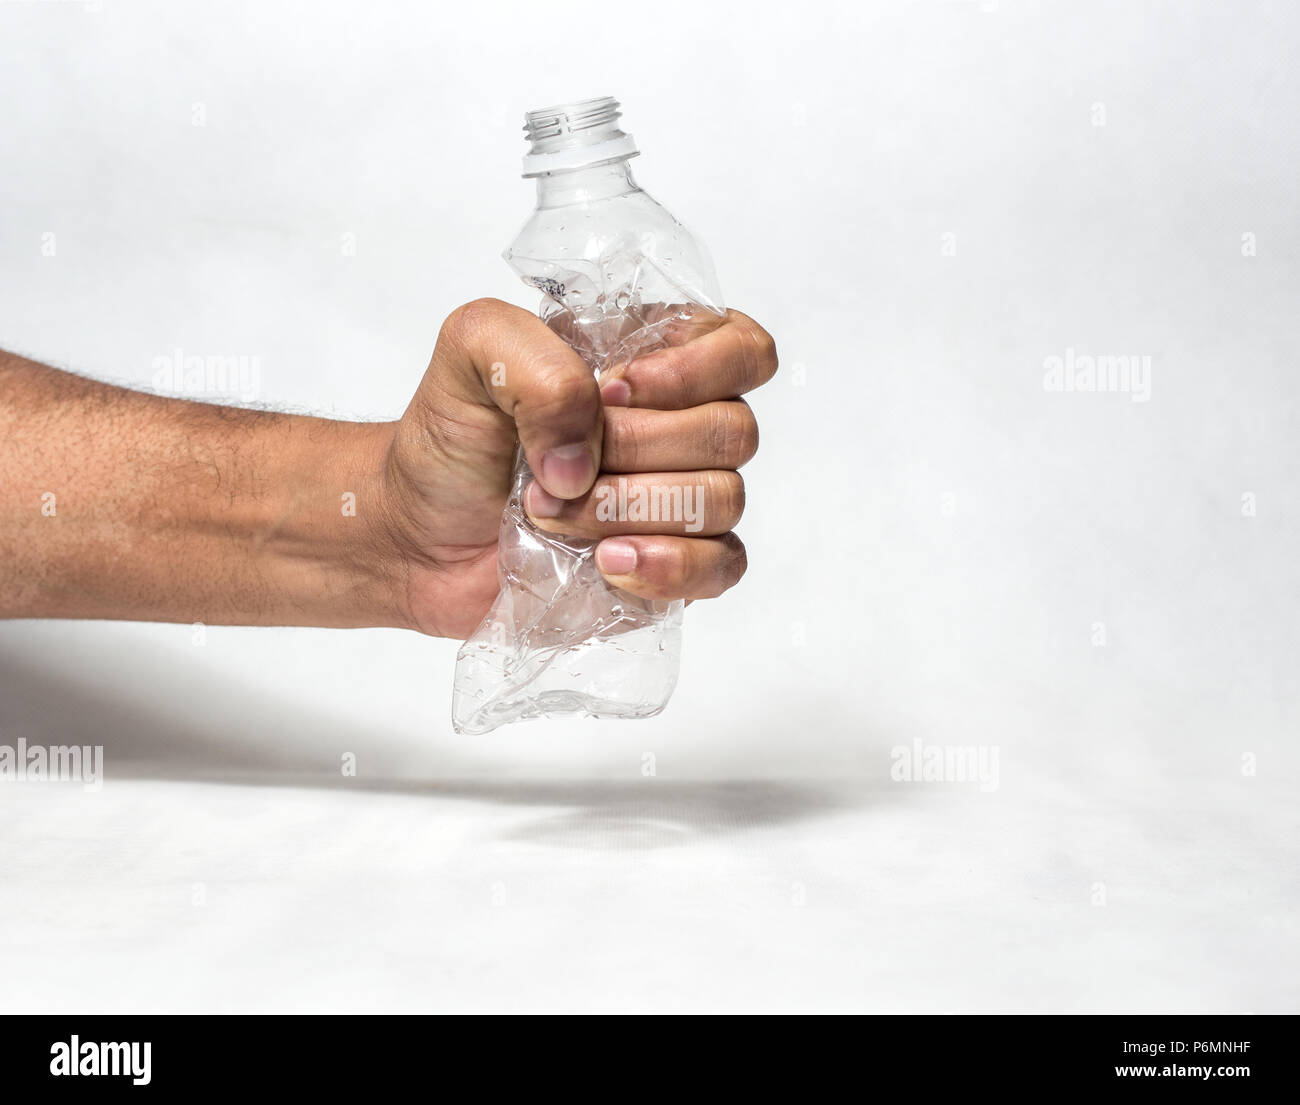 hand squashing empty plastic water bottle resembling ban of single use  plastic recycle Stock Photo - Alamy